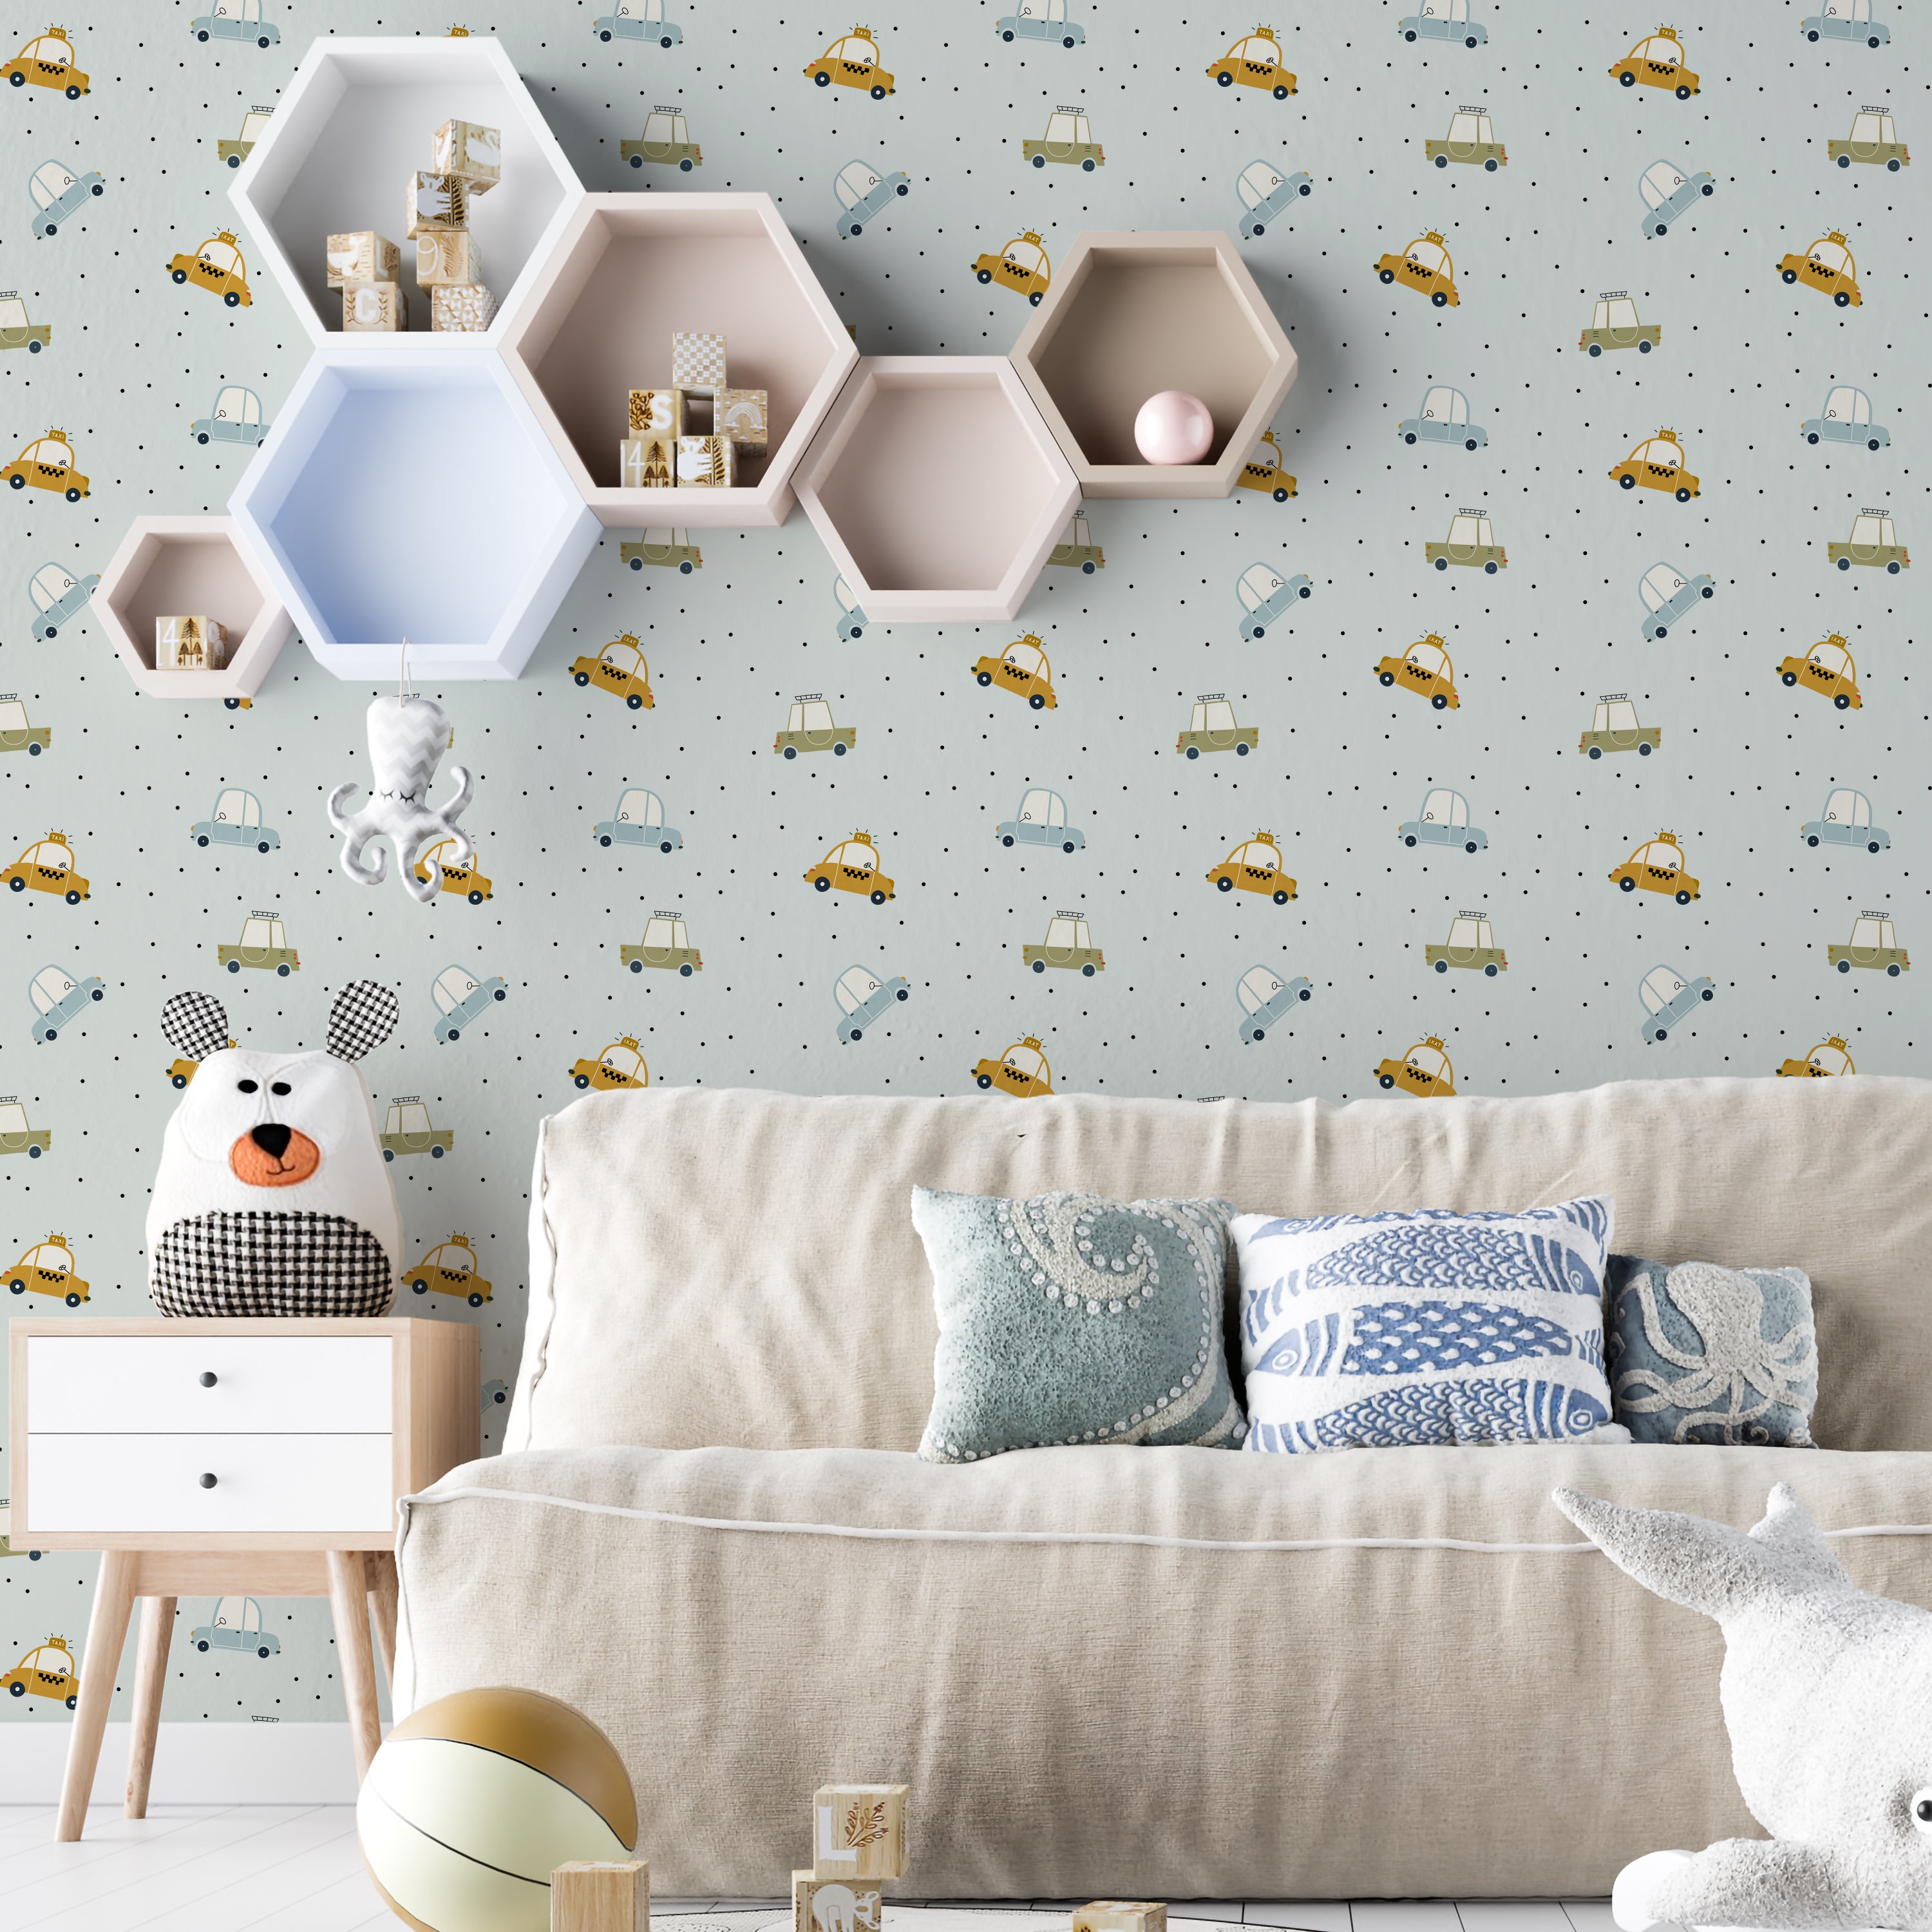 A cozy children's room setting showcasing the Cute Cars Wallpaper, with cheerful blue and yellow cars scattered across a dotted gray backdrop. The playful theme complements the room's decor, including a stuffed bear, wooden toys, and a modern, child-friendly furniture setup